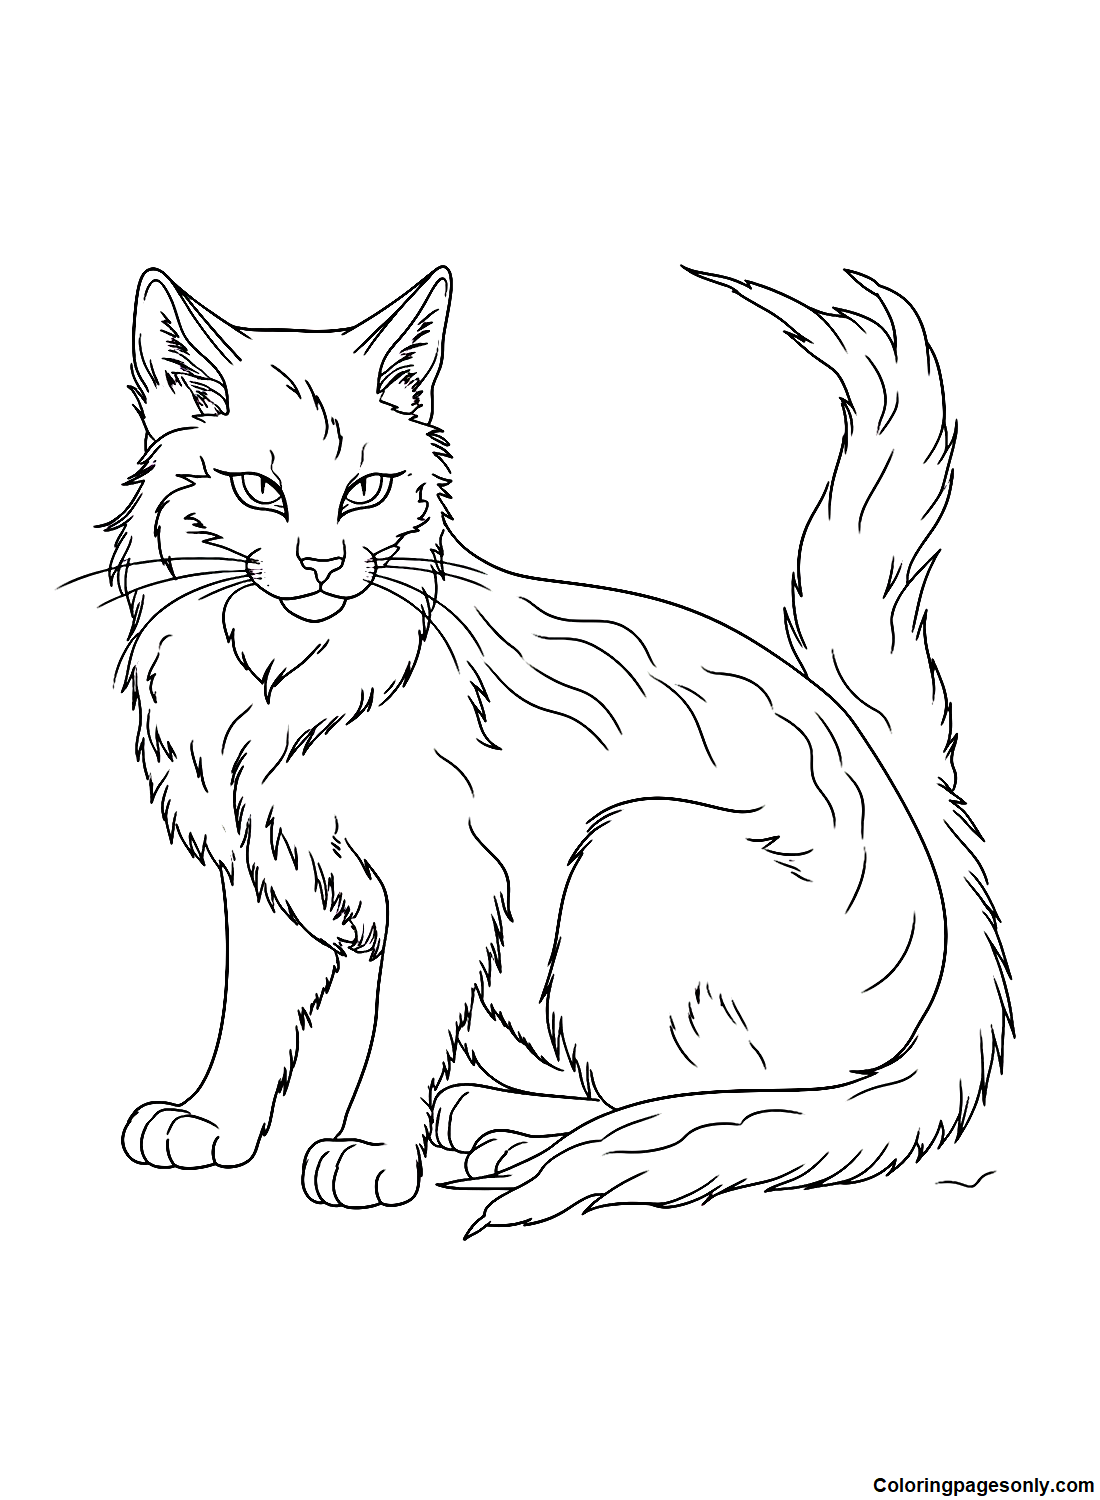 Warrior Cats Firestar Coloring Page